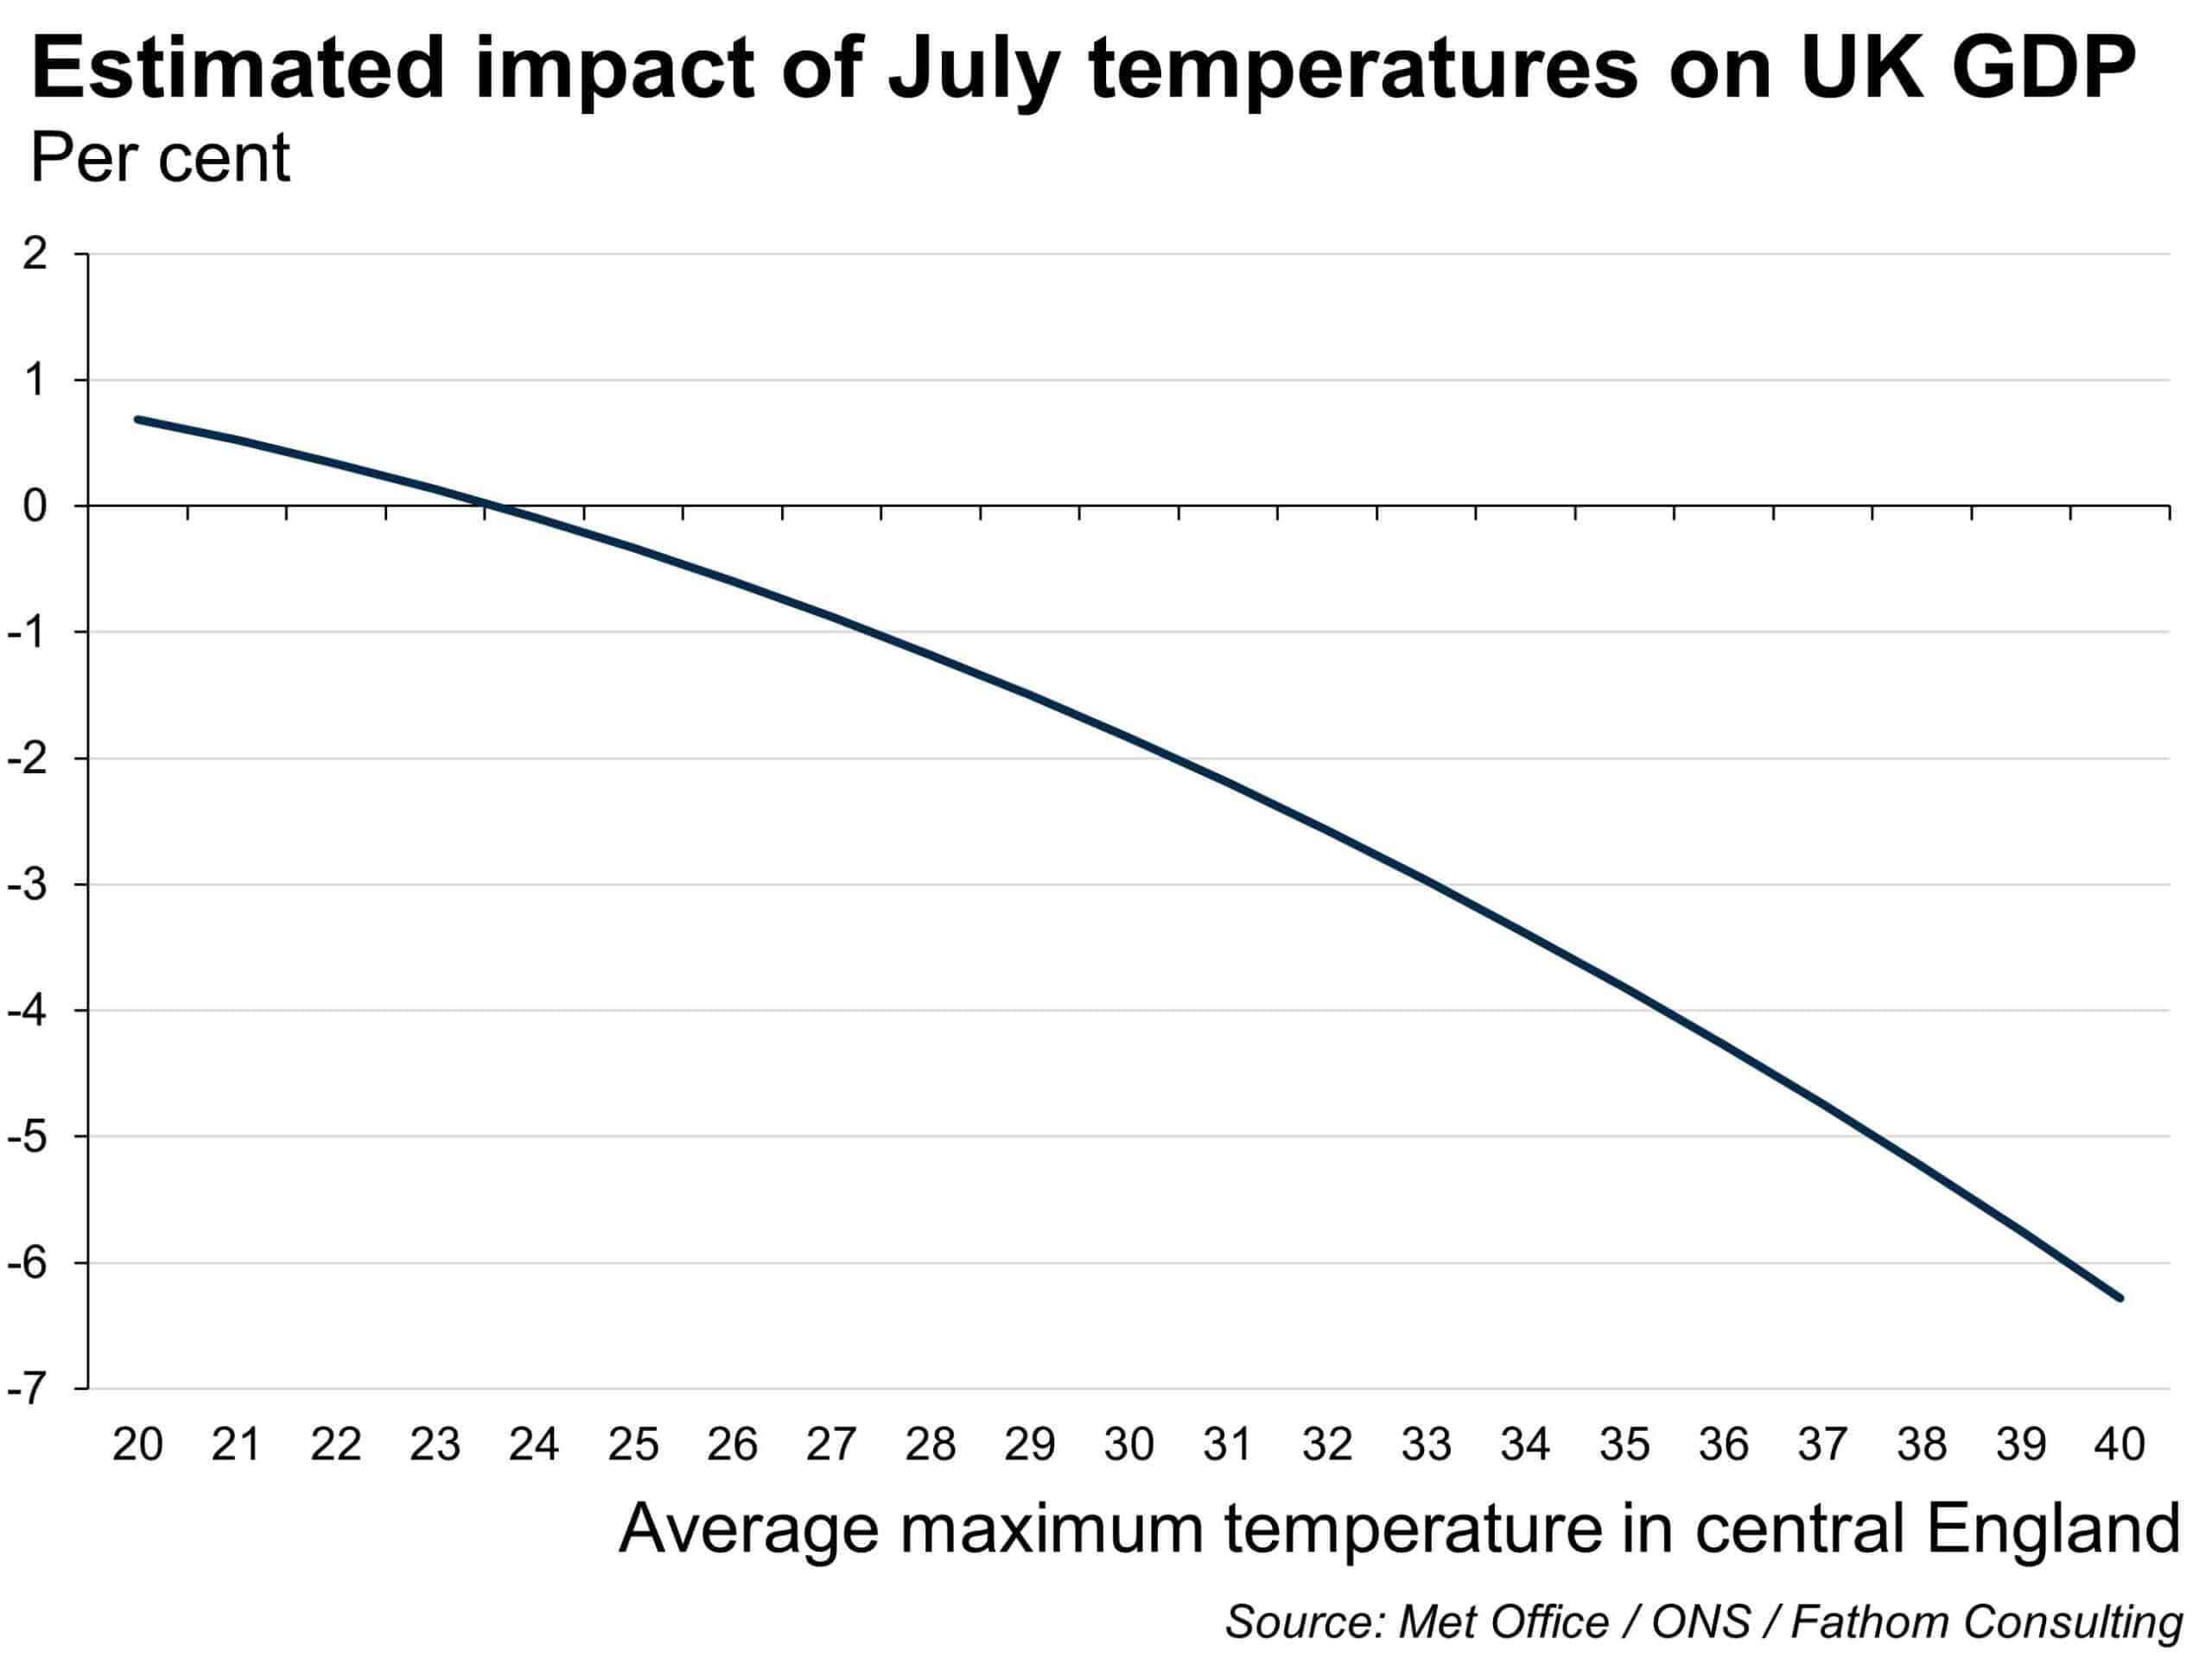 The impacts of rising temperature are non-linear and severe